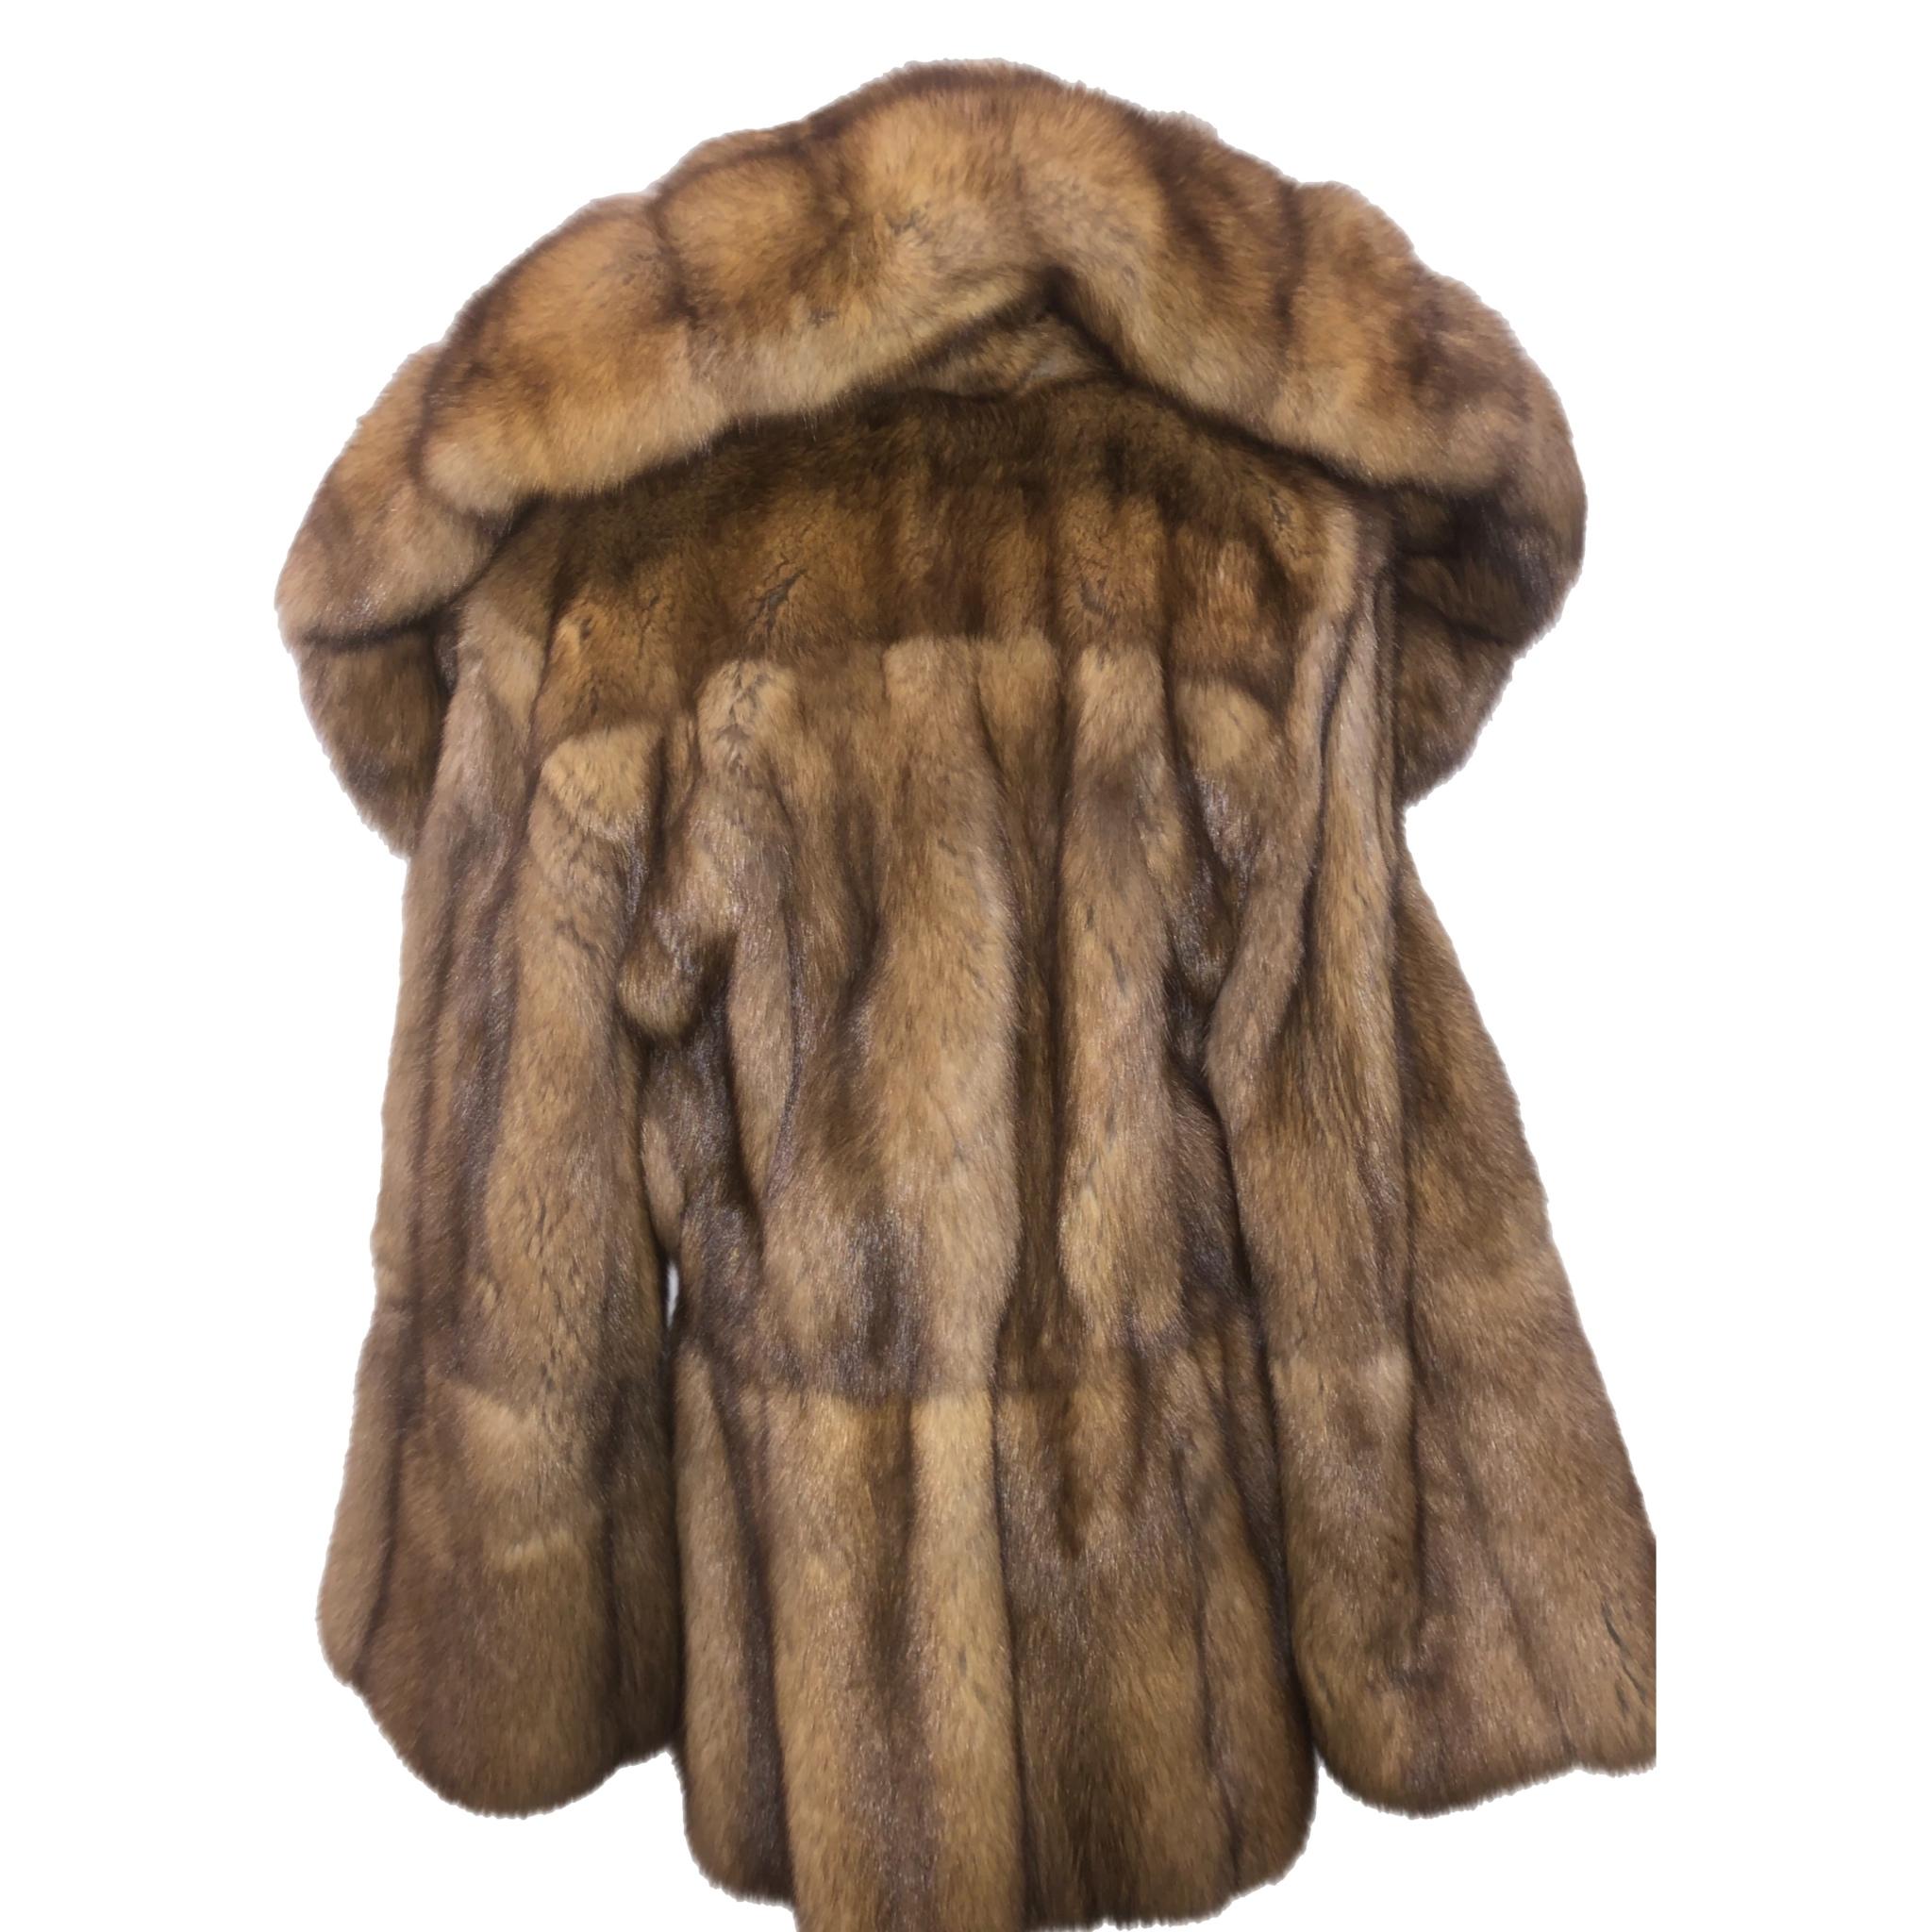 Bisang Russian Sable fur coat size 14-16 tags 65000$ For Sale 9